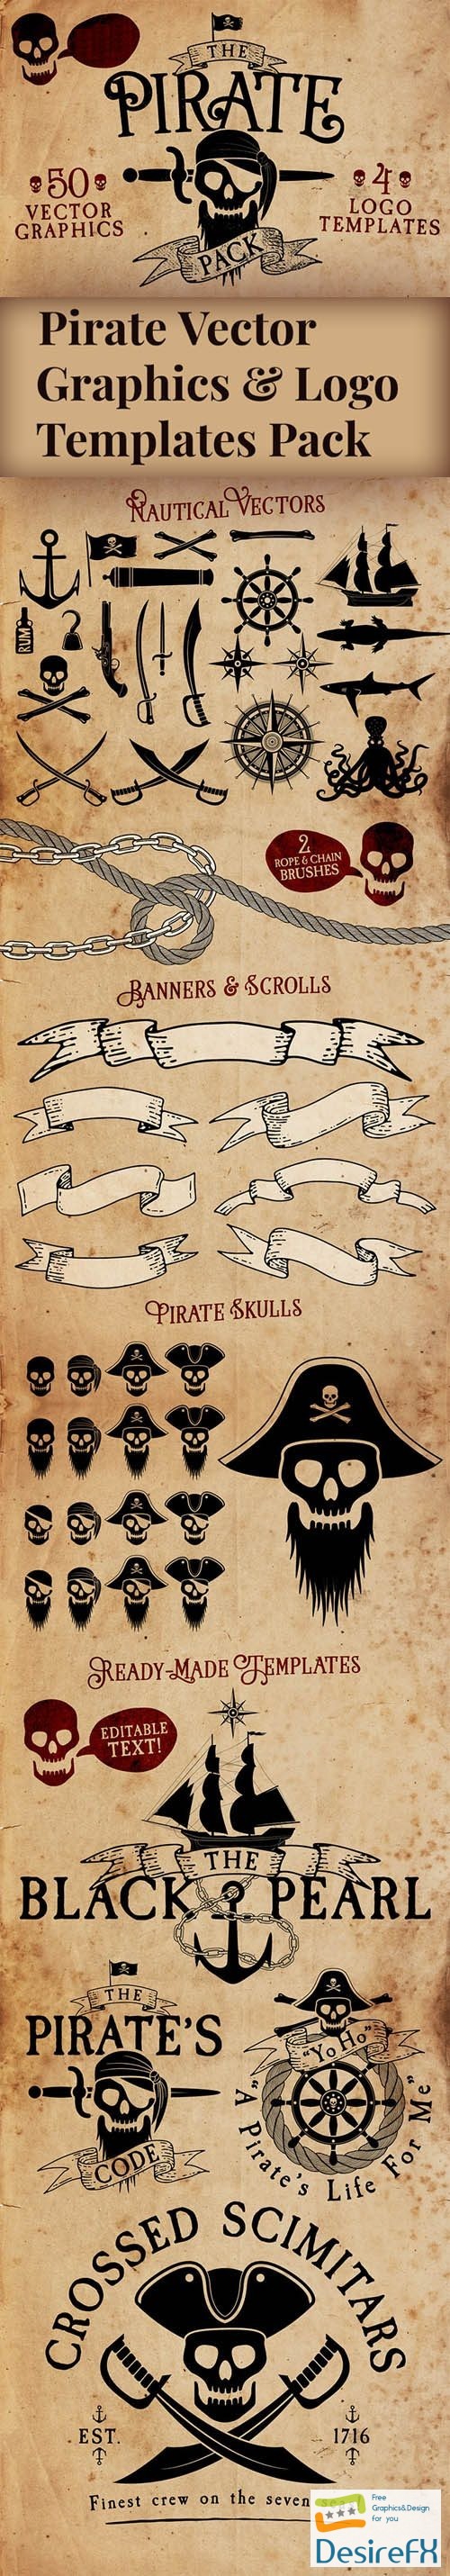 Pirate Vector Graphics & Logo Vector Templates Pack [Ai/EPS]